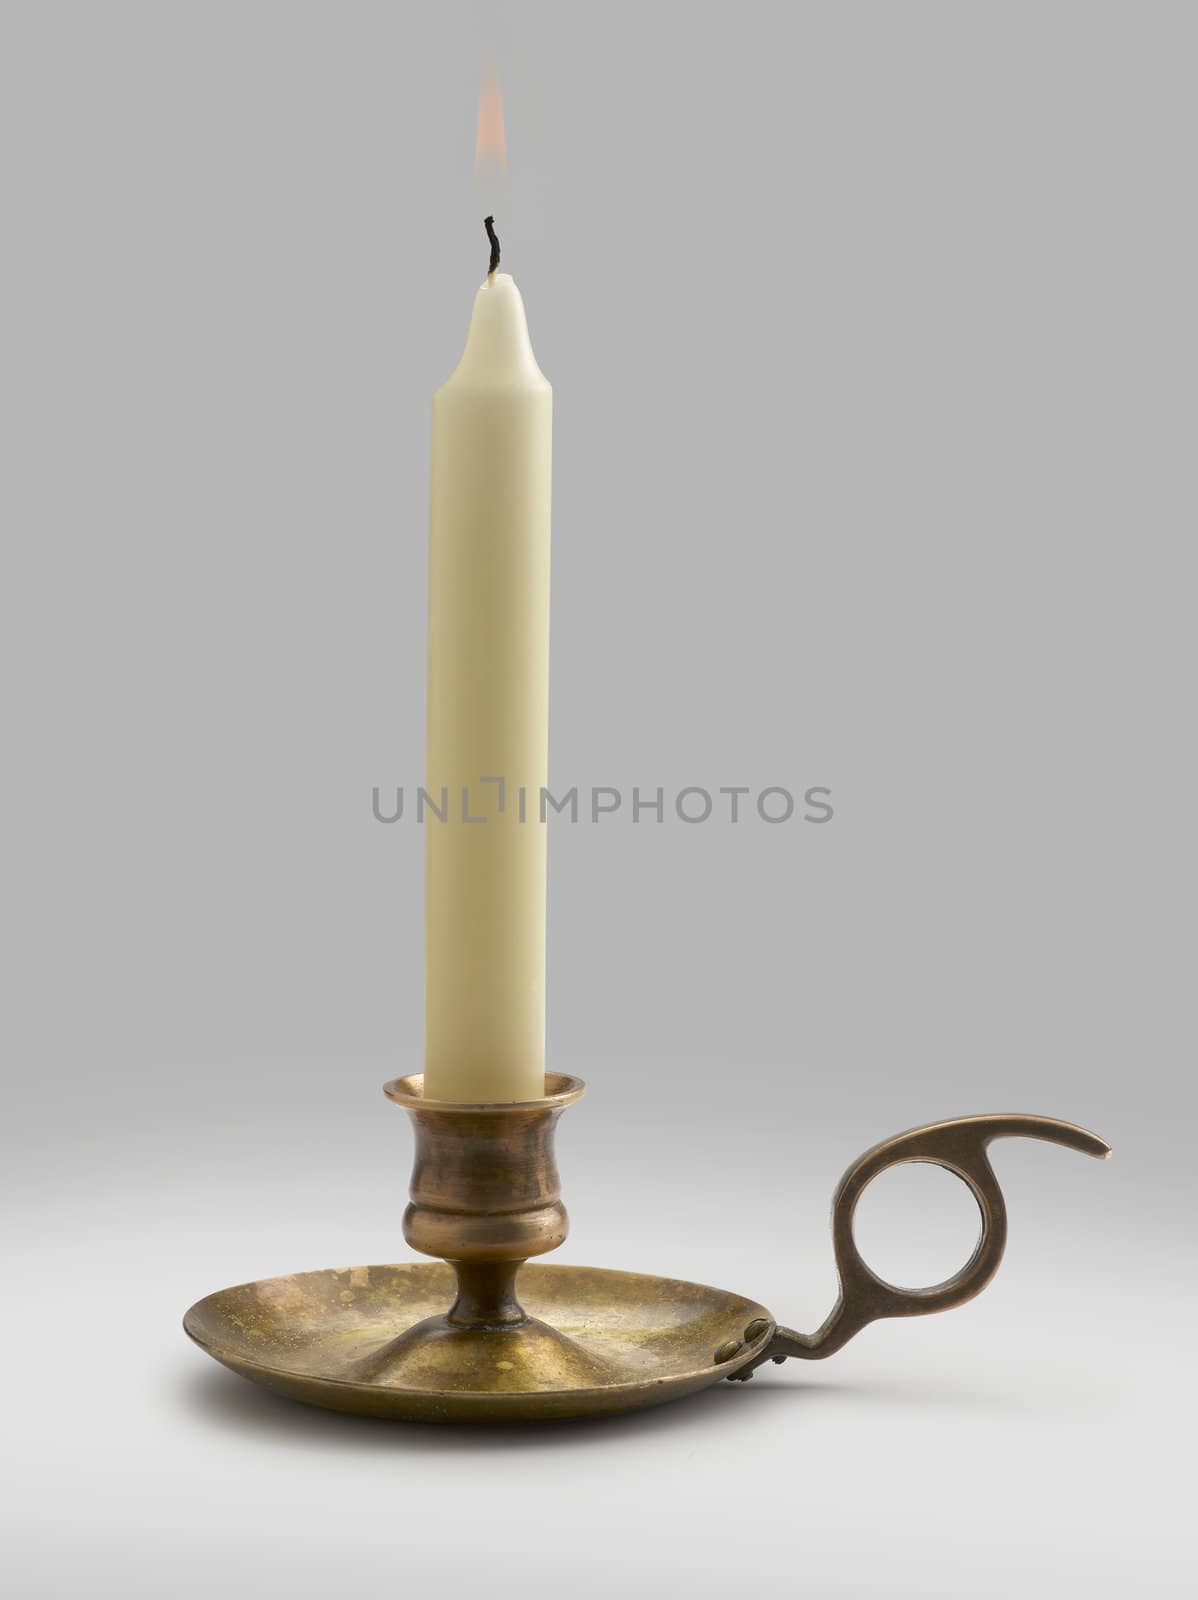 Candlestick with flame lights (clipping path) by pbombaert